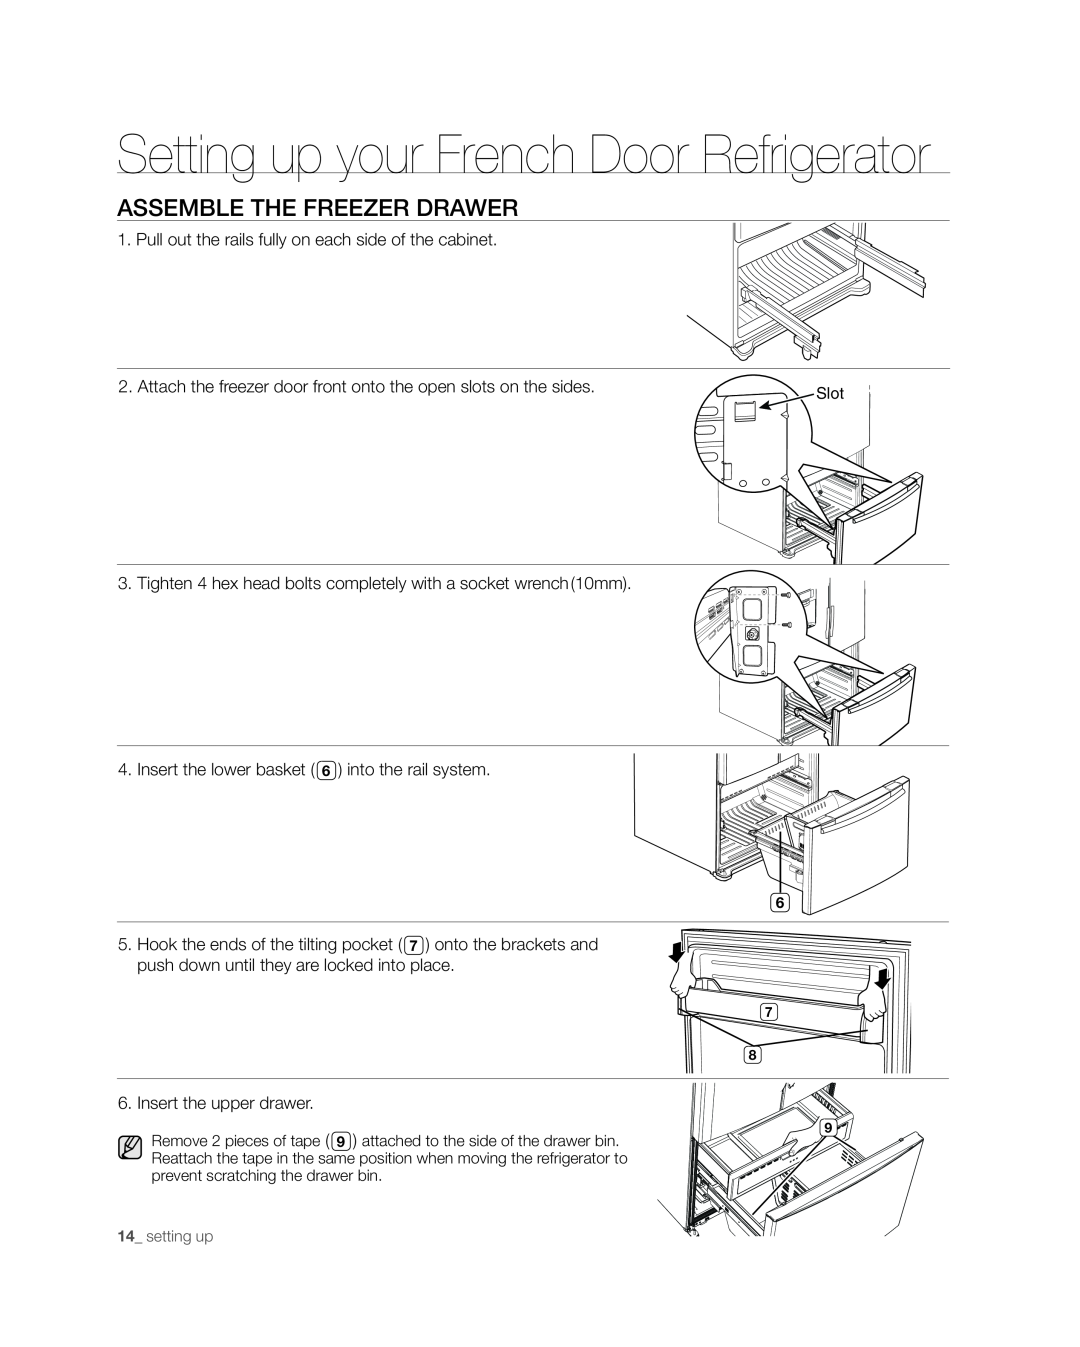 Samsung RFG237, RFG238AARS user manual assemble the freezer drawer, Setting up your French Door Refrigerator 